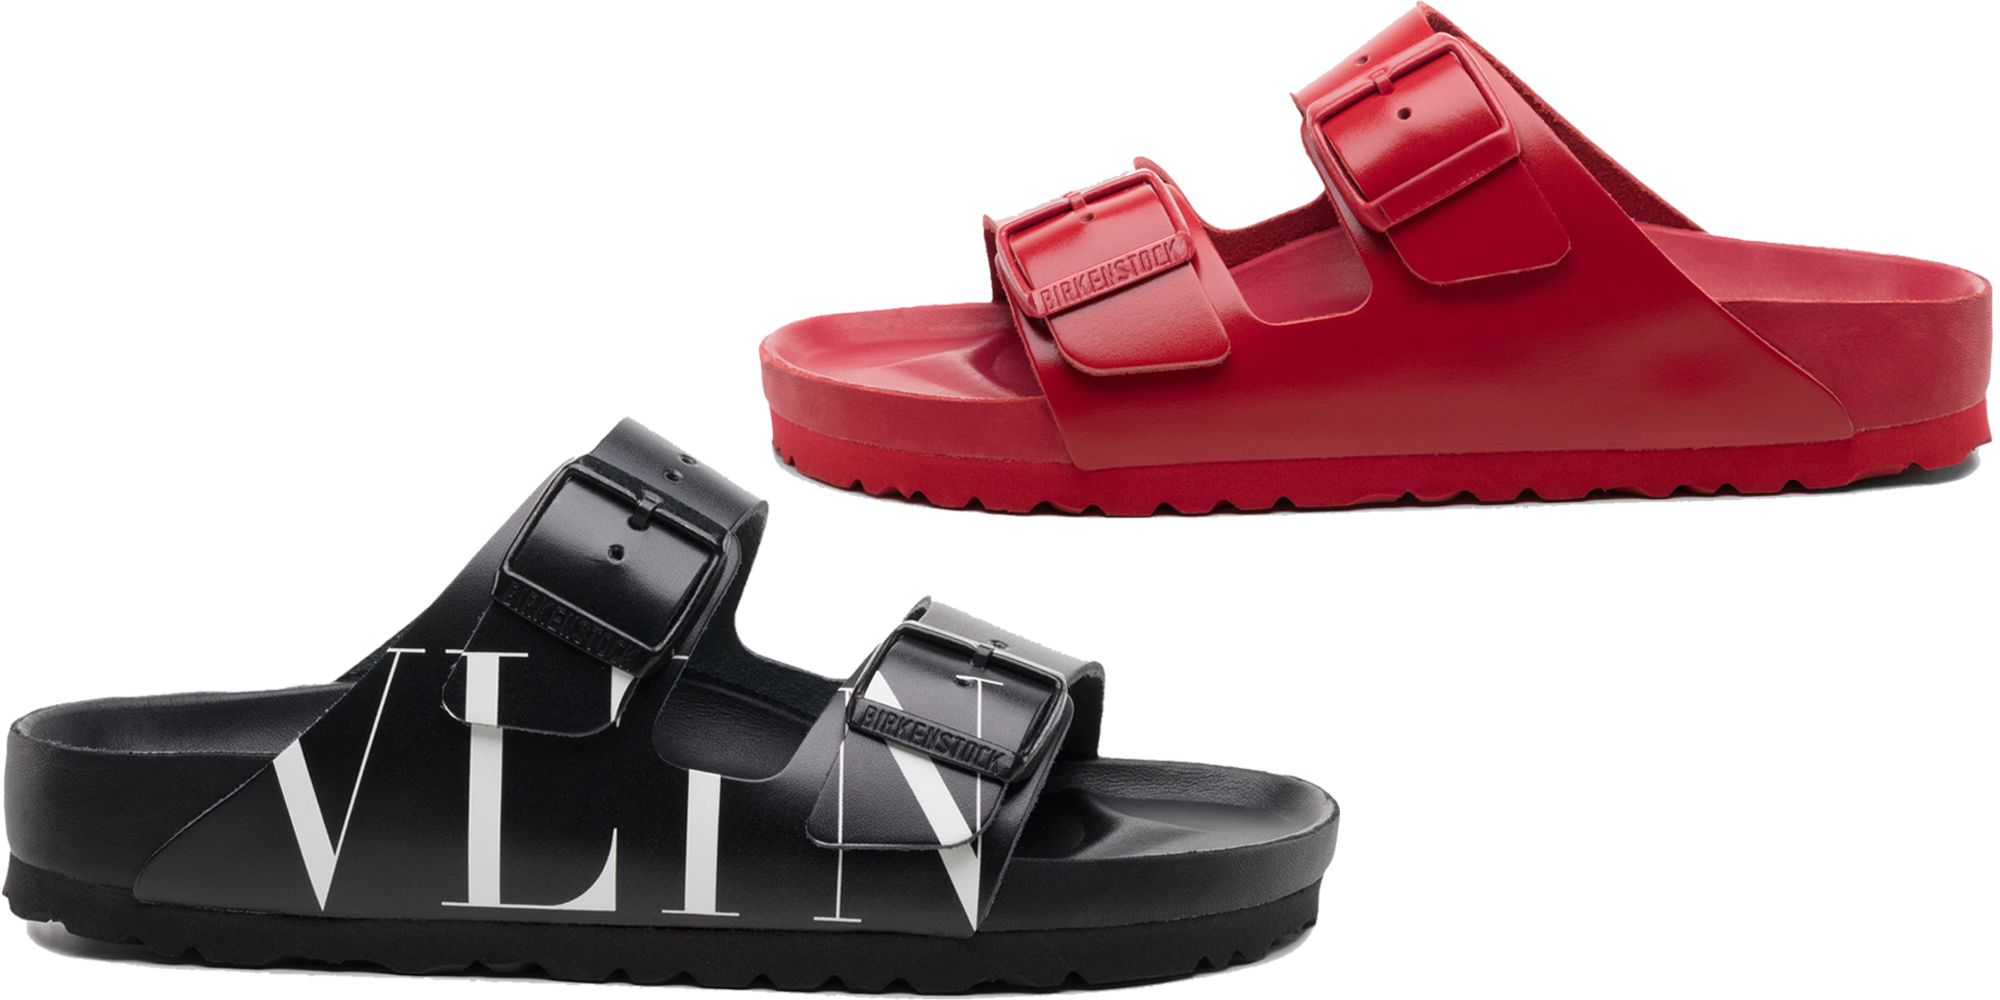 Valentino Birkenstock Are Now to Shop for $495